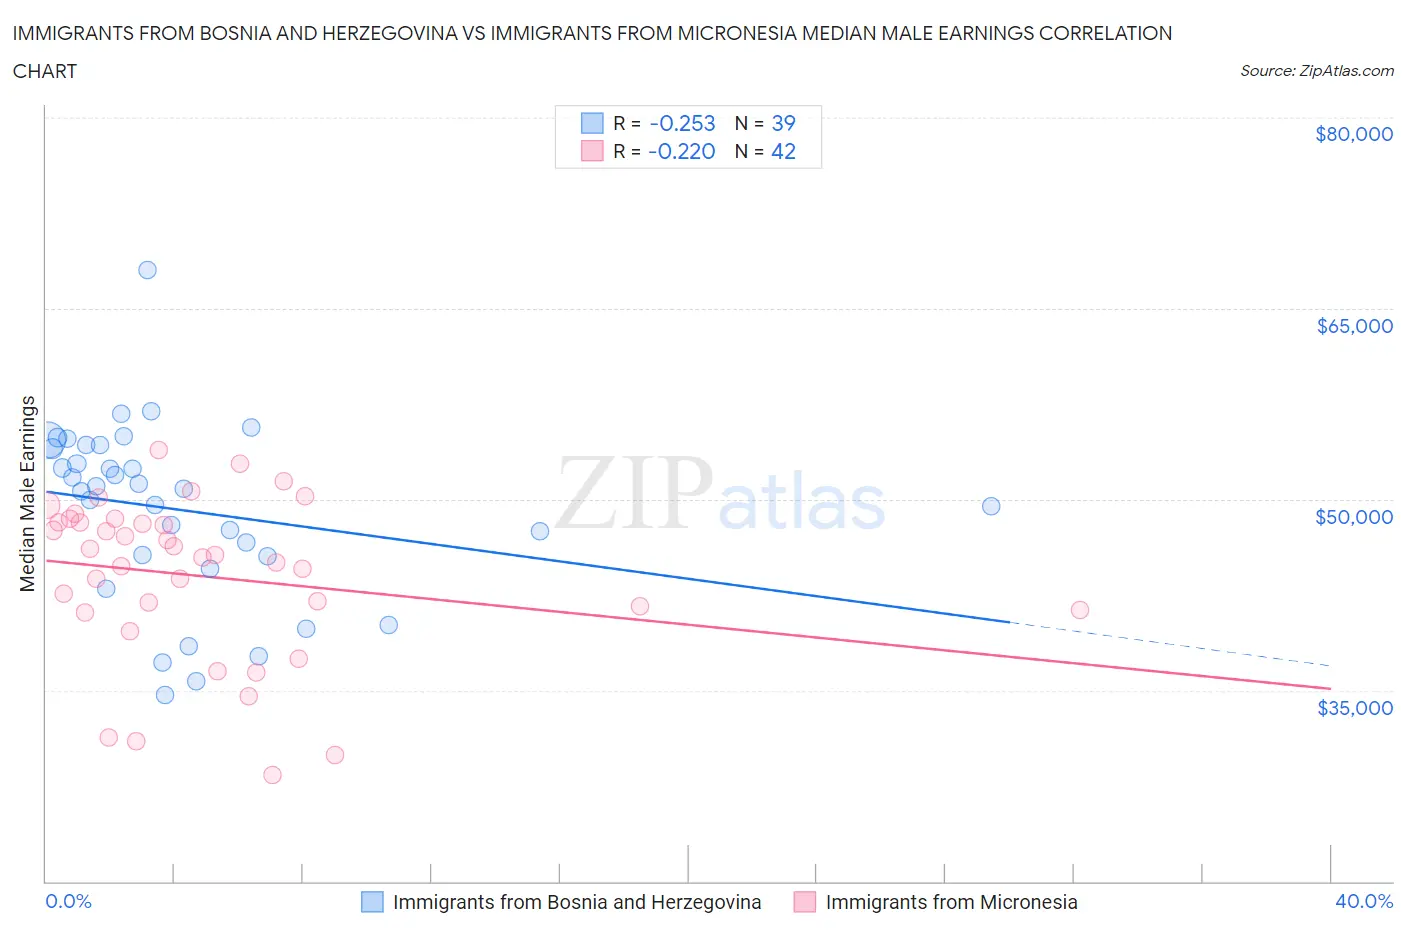 Immigrants from Bosnia and Herzegovina vs Immigrants from Micronesia Median Male Earnings